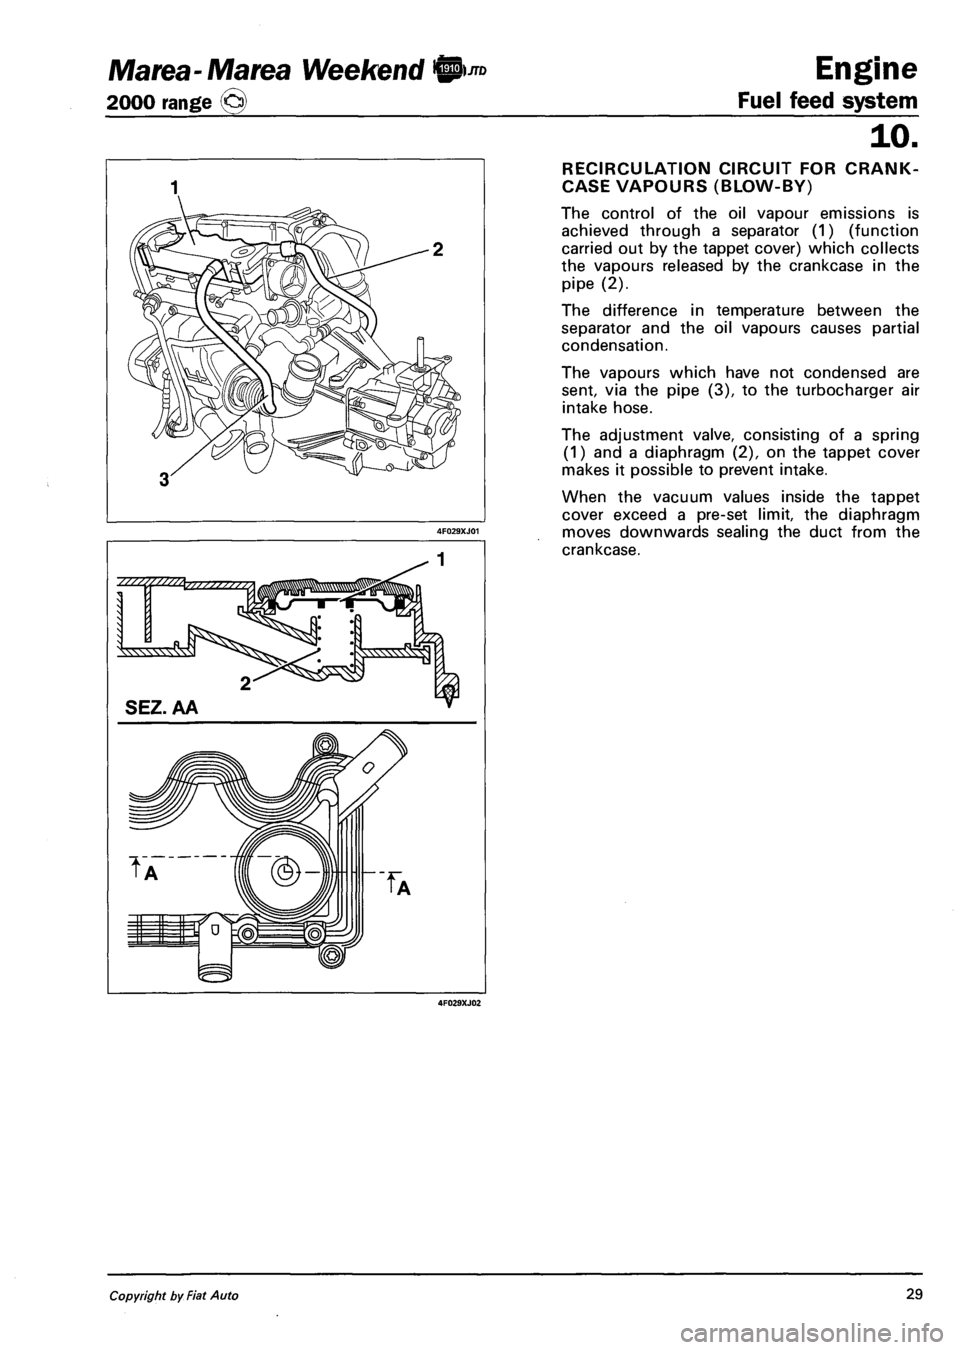 FIAT MAREA 2000 1.G Owners Manual Marea-Marea Weekend 
2000 range (j§)  
1 
4F029XJ02 
Engine 
Fuel feed system 
10. 
RECIRCULATION CIRCUIT FOR CRANK-
CASE VAPOURS (BLOW-BY) 
The control of the oil vapour emissions is 
achieved throu